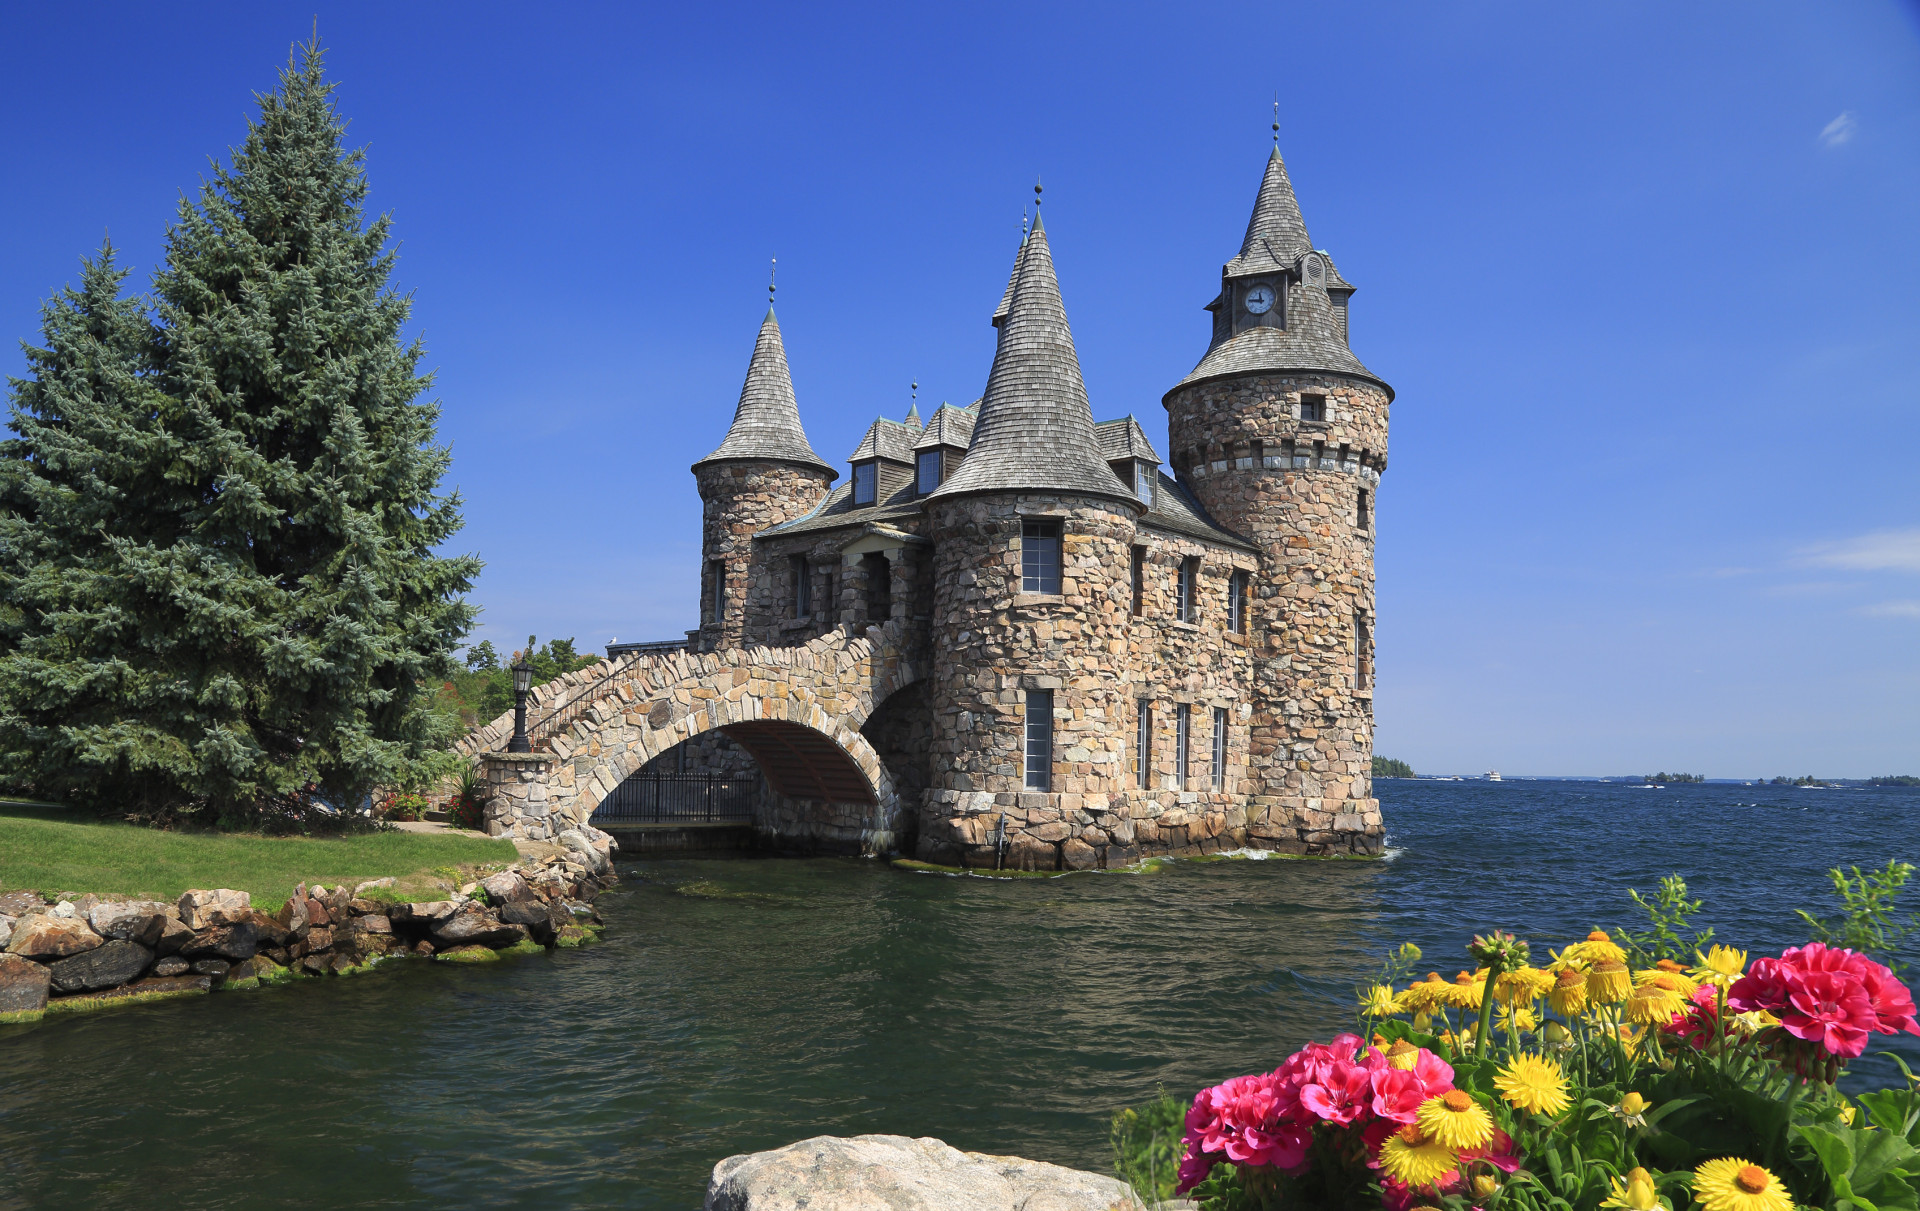 Who said you need to fly to Europe to see a captivating castle? Located in the 1000 Islands, right near Alexandria Bay, stands an architectural marvel built in 1904.<p><a href="https://www.msn.com/en-us/community/channel/vid-7xx8mnucu55yw63we9va2gwr7uihbxwc68fxqp25x6tg4ftibpra?cvid=94631541bc0f4f89bfd59158d696ad7e">Follow us and access great exclusive content every day</a></p>